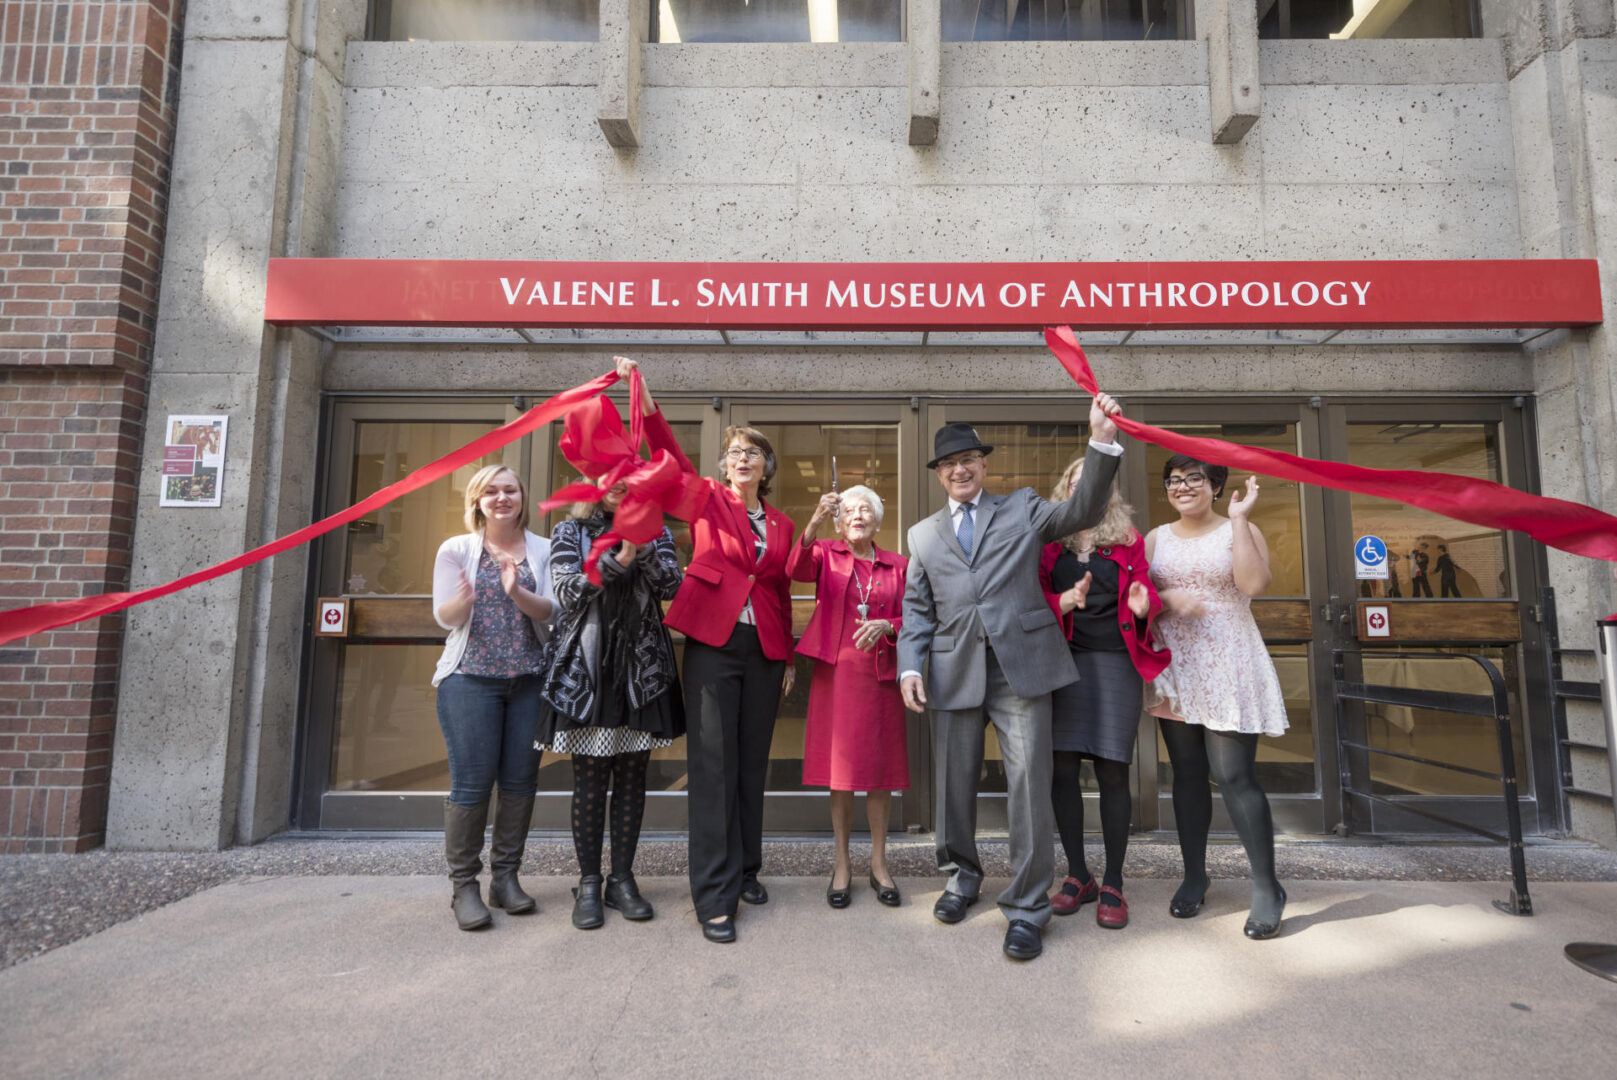 Valene Smith stands in a row of celebratory people as they cut the giant ribbon to open the new Valene L Smith Museum.